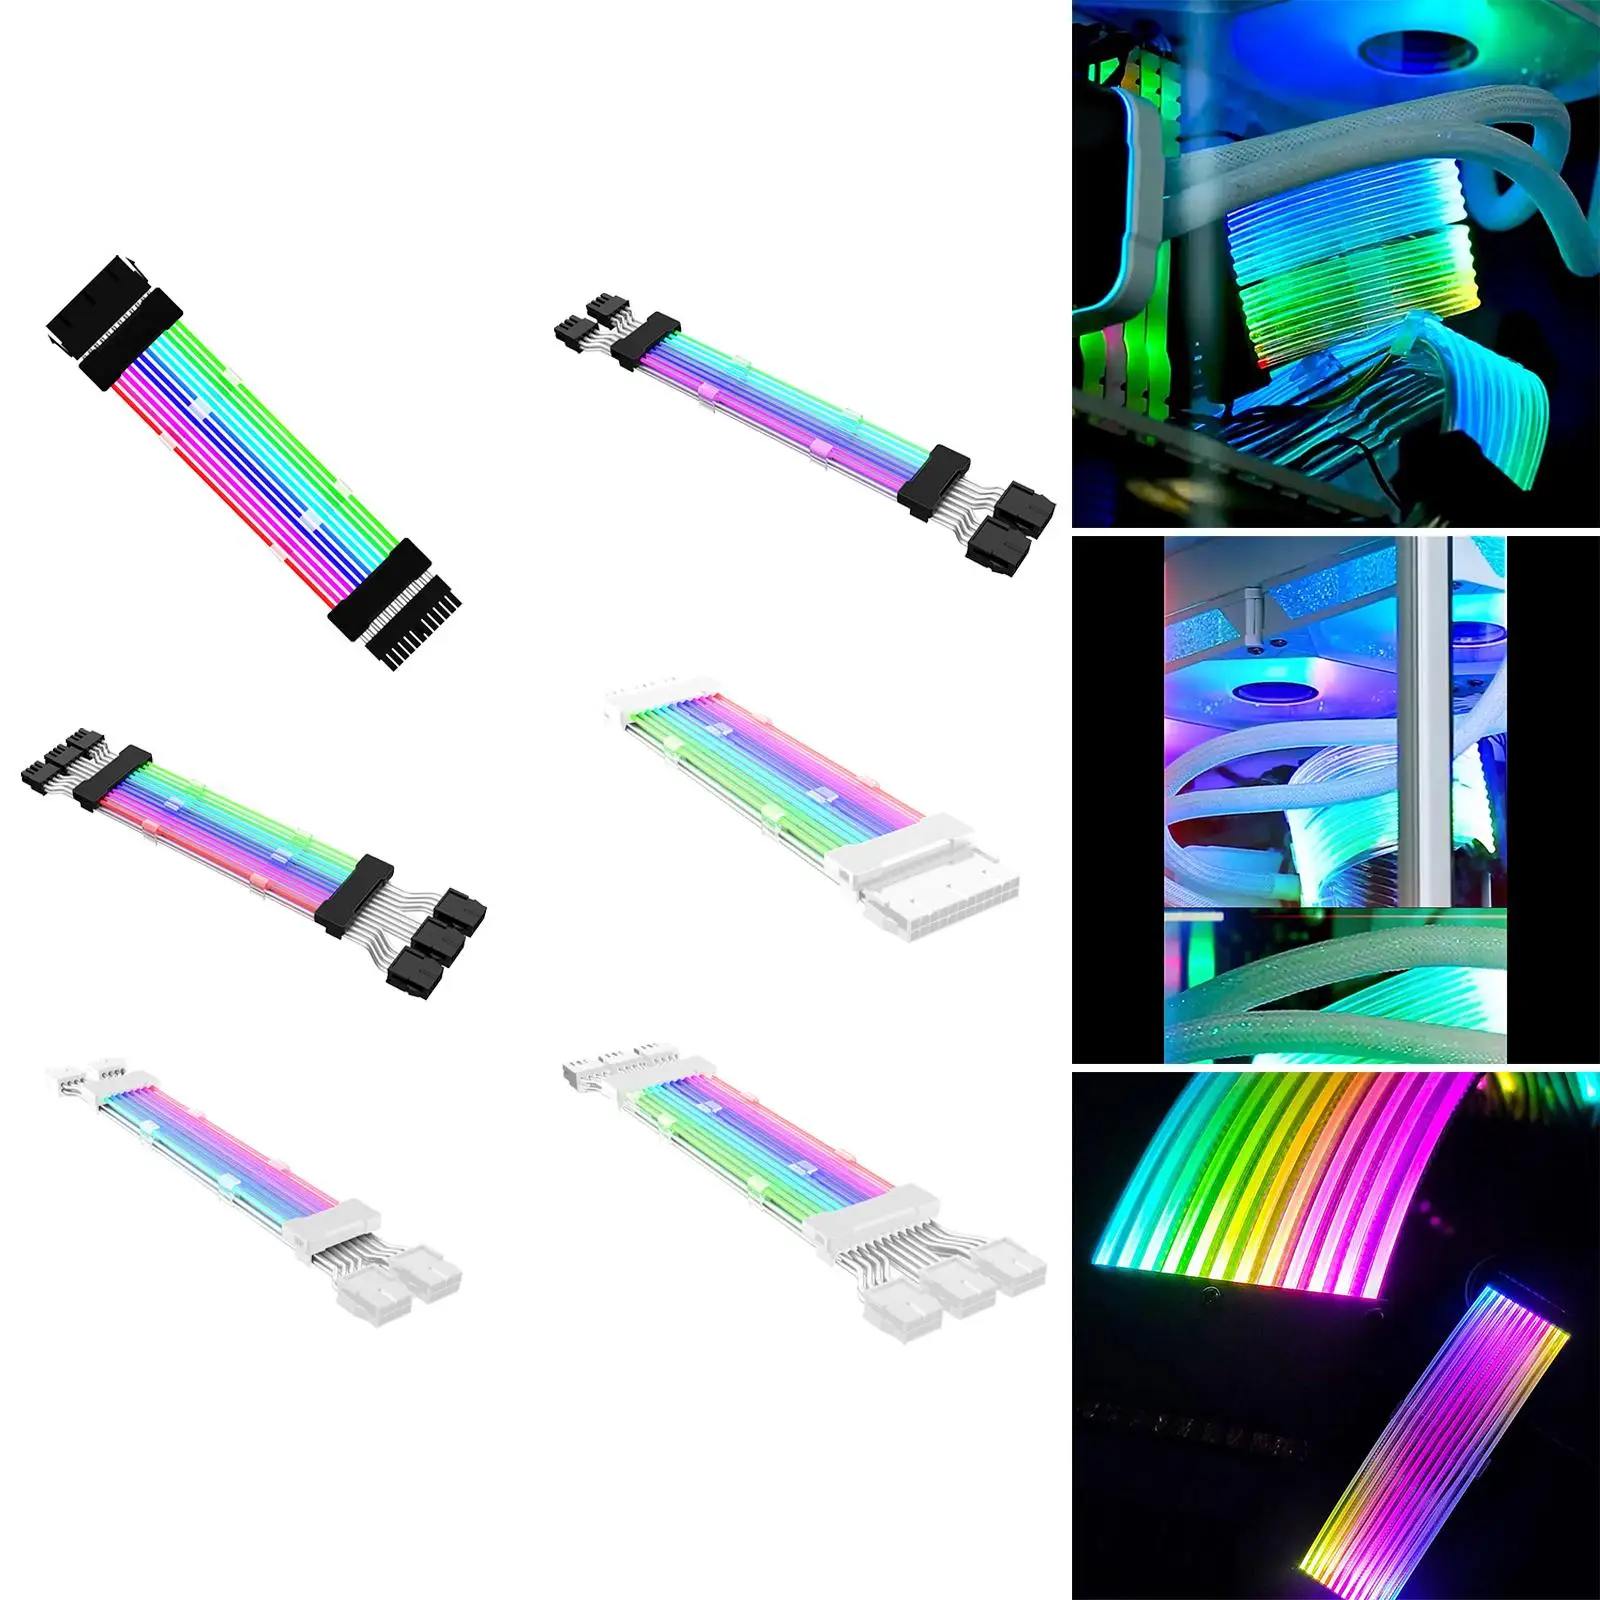 PCIe Cable 8 Pin RGB Cable PSU Extension Cable Set RGB Power Extension Cable Neon Color Line Extension RGB Cable for Computer